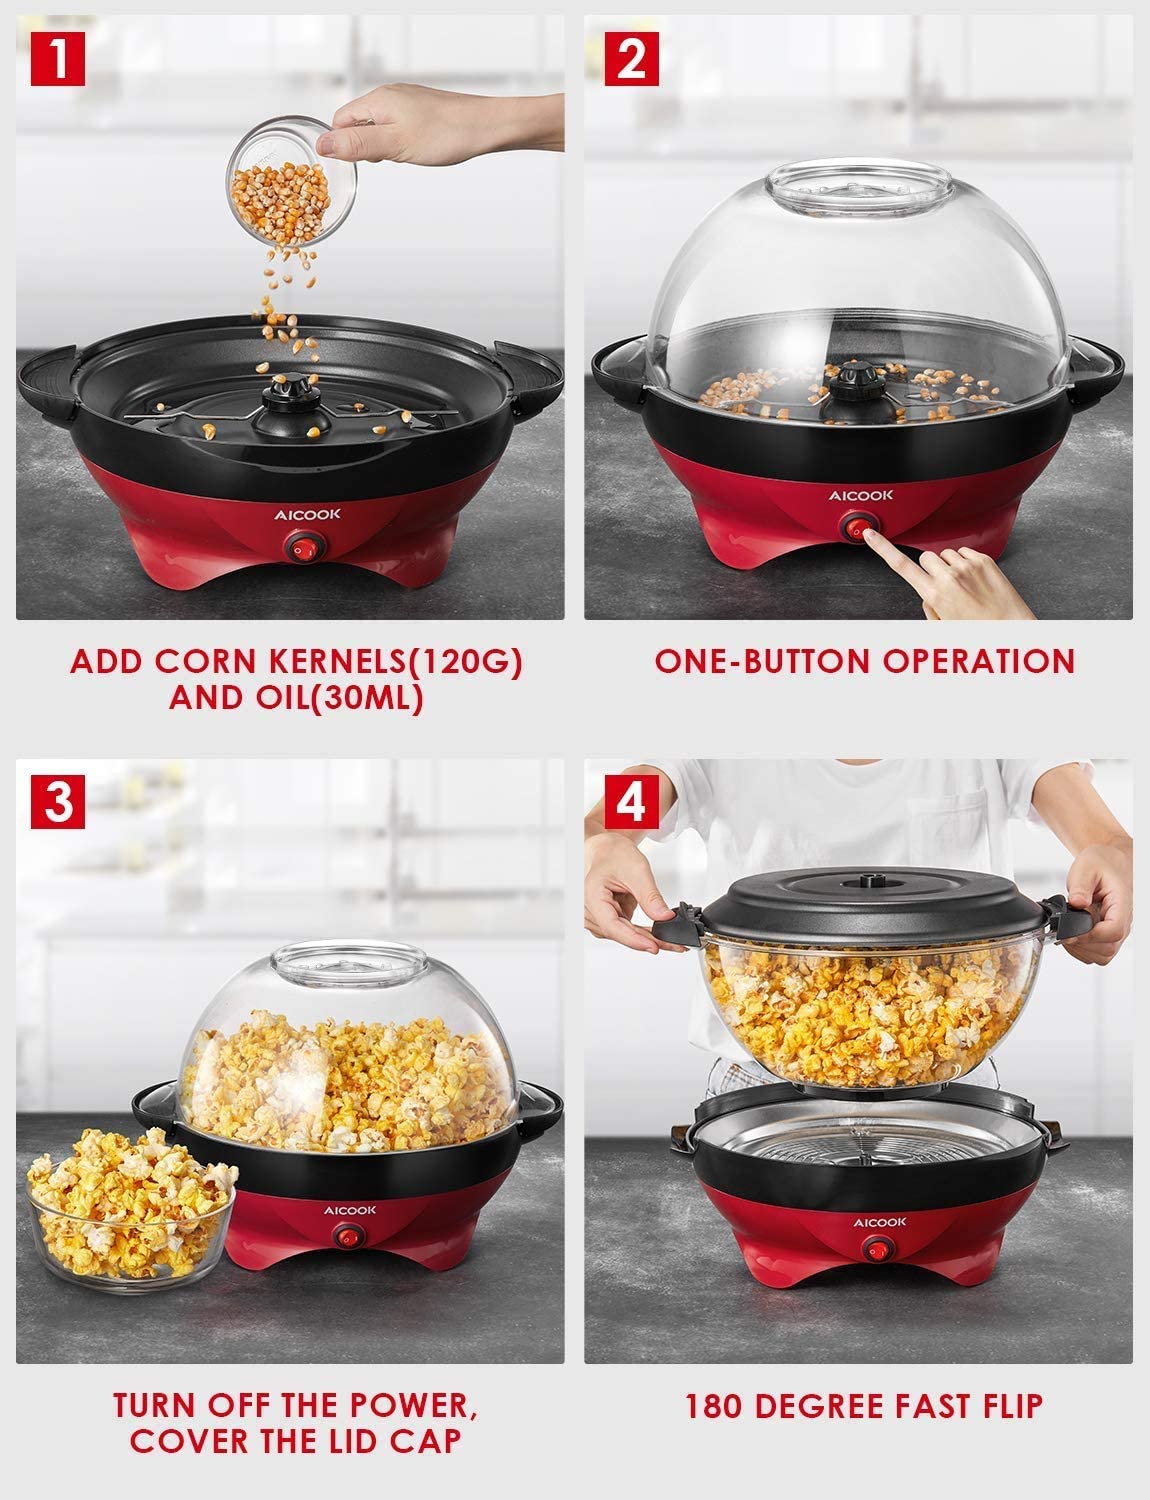 AICOOK Hot Air Popcorn Popper, 1400W, Aqua and red, Popcorn Maker With